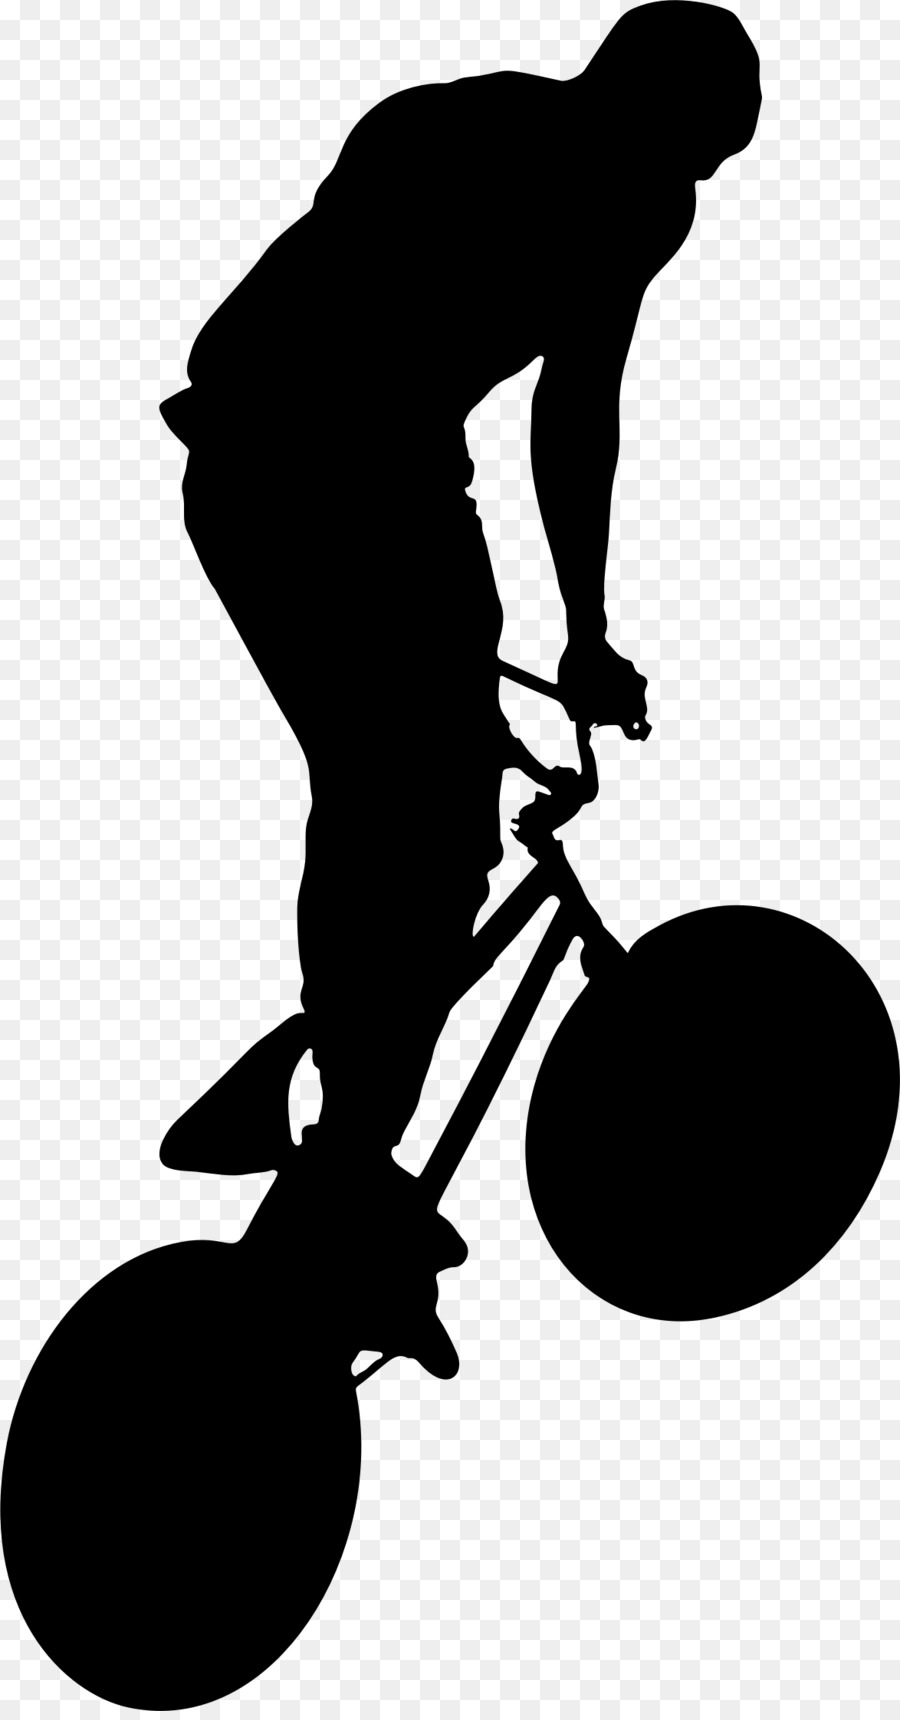 Bicycle Cycling BMX Clip art - bicycle silhouette png download - 1174*2232 - Free Transparent Bicycle png Download.